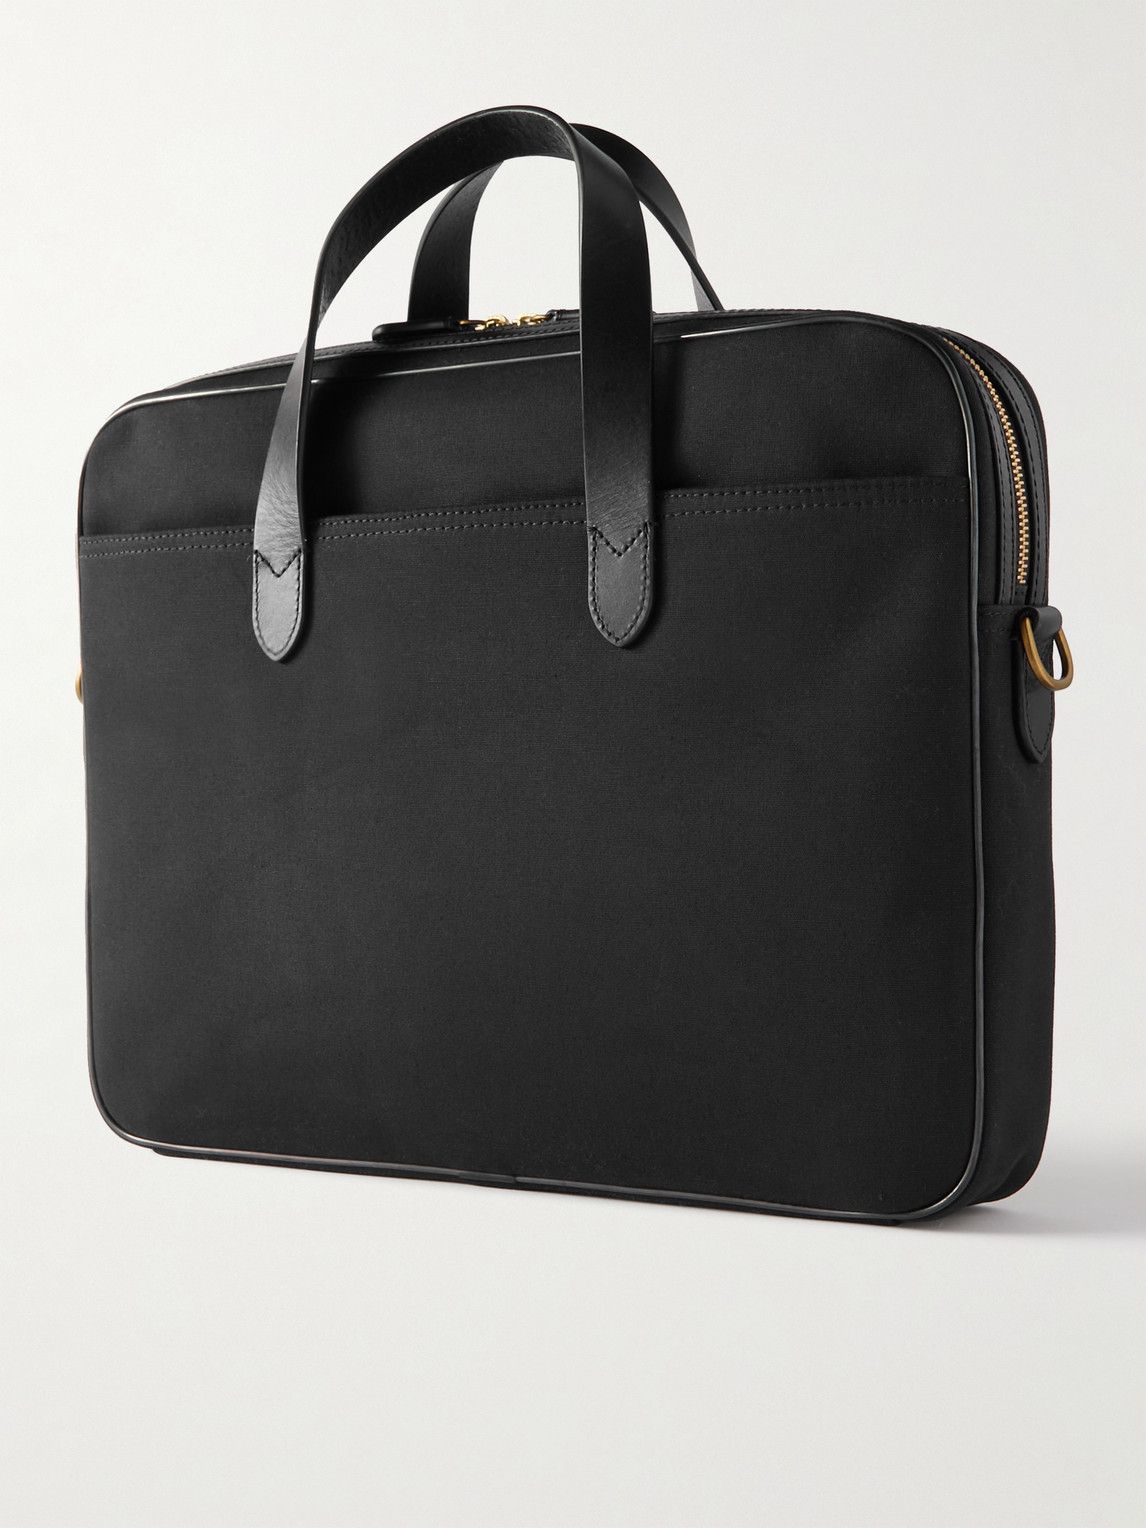 Polo Ralph Lauren - Leather-Trimmed Canvas Briefcase